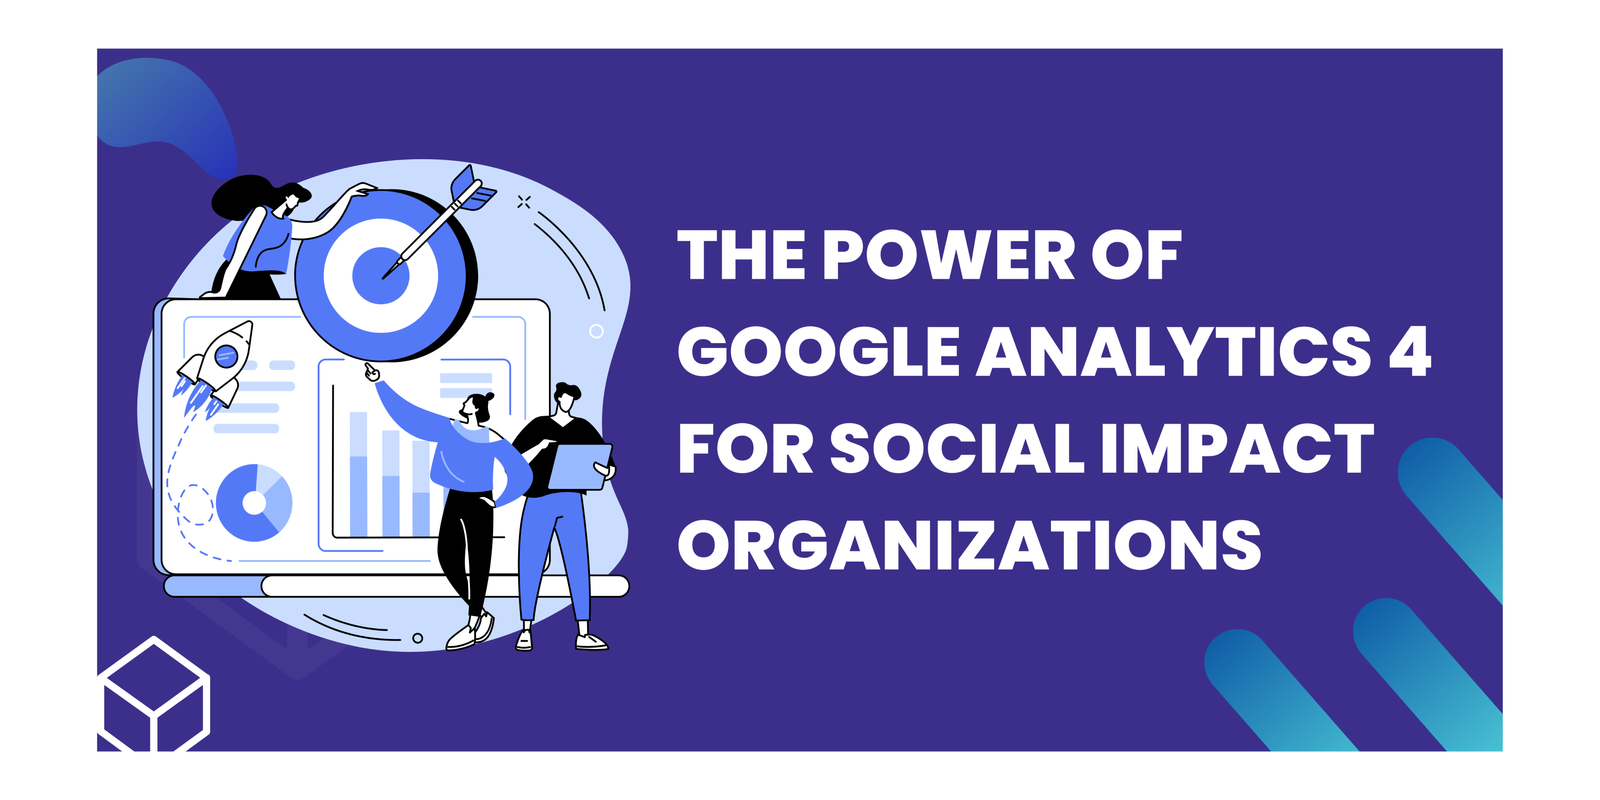 The Power of Google Analytics 4 for Social Impact Organizations